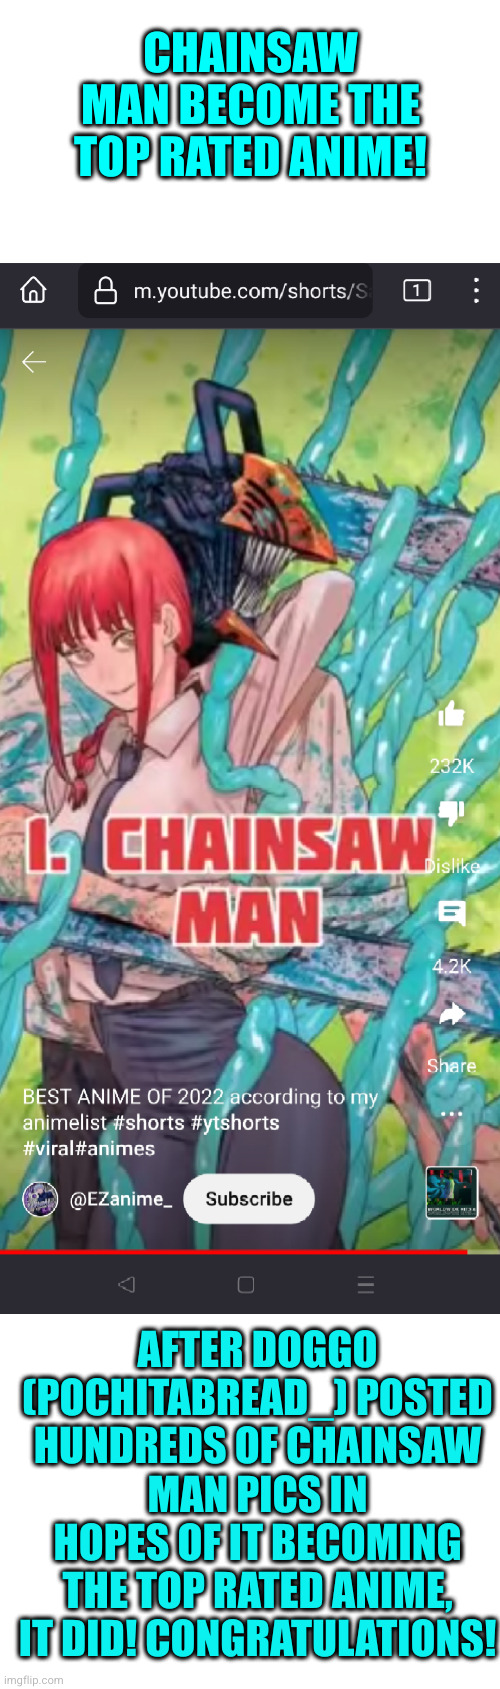 Doggo gave it enough luck | CHAINSAW MAN BECOME THE TOP RATED ANIME! AFTER DOGGO (POCHITABREAD_) POSTED HUNDREDS OF CHAINSAW MAN PICS IN HOPES OF IT BECOMING THE TOP RATED ANIME, IT DID! CONGRATULATIONS! | image tagged in blank white template,chainsaw man,anime,doggo,yayaya,no way | made w/ Imgflip meme maker